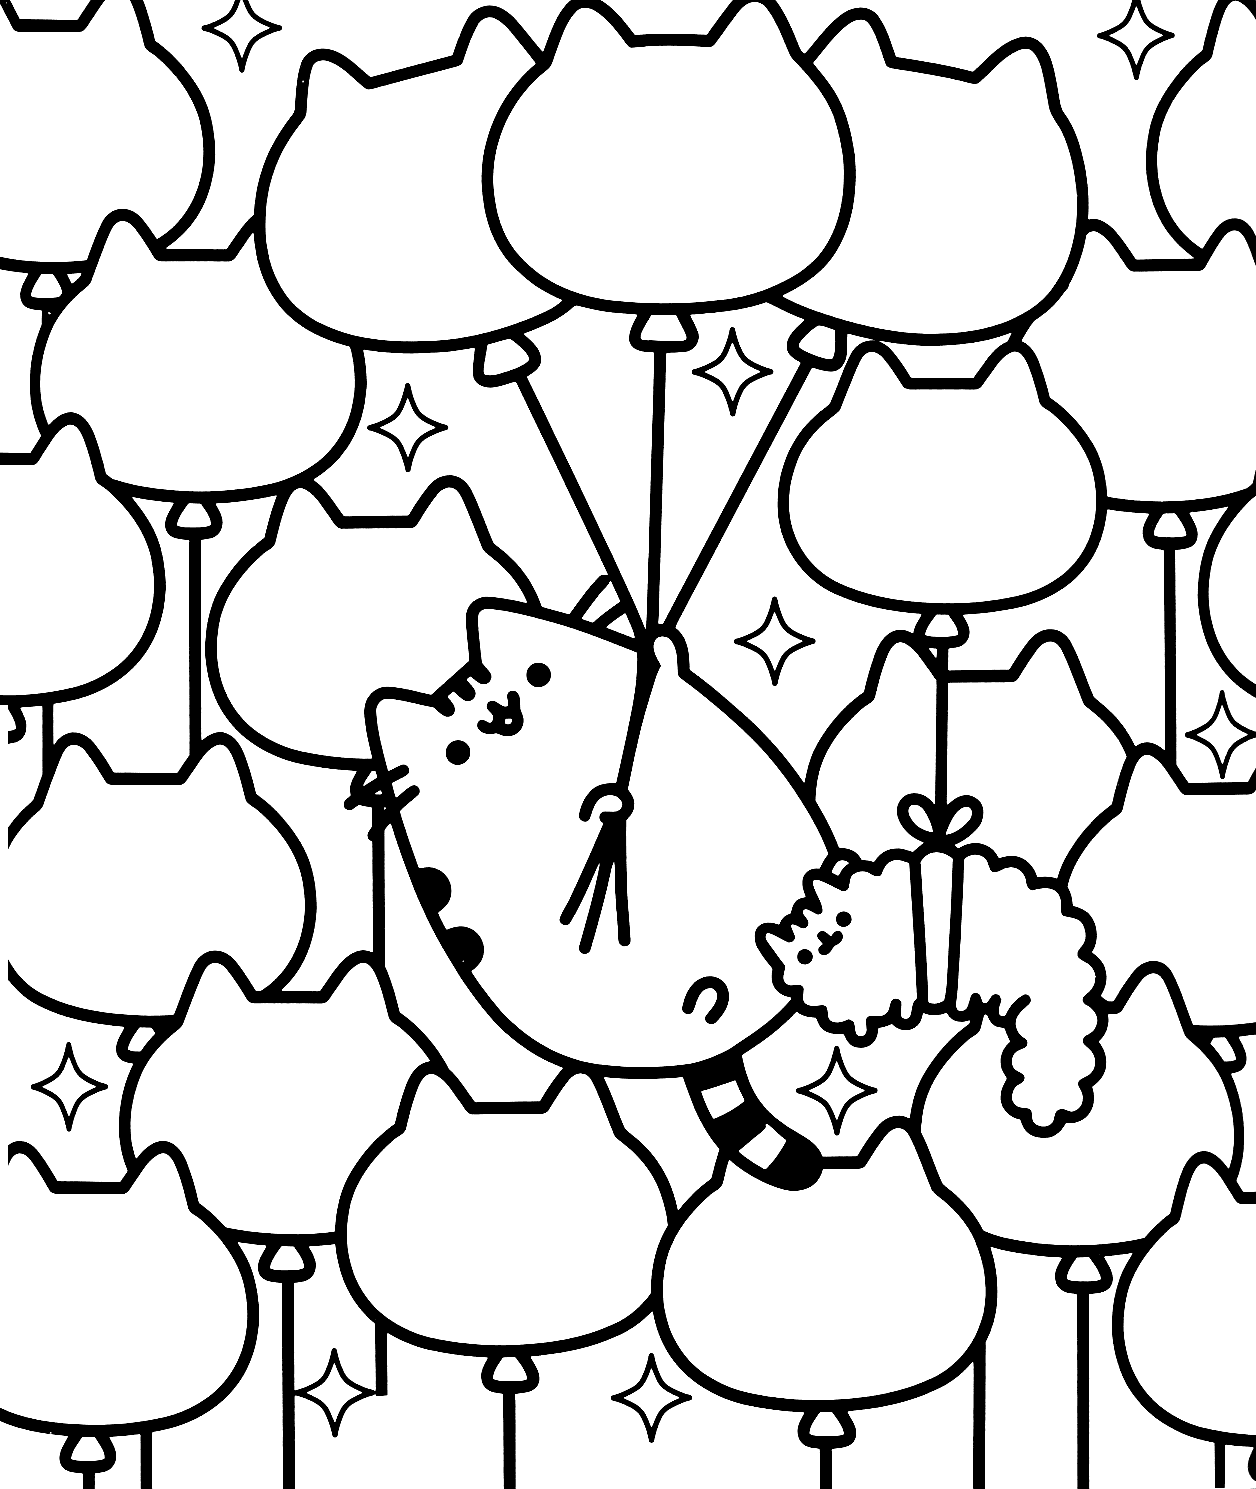 Pusheen Printable | Database Ideas Coloring Page